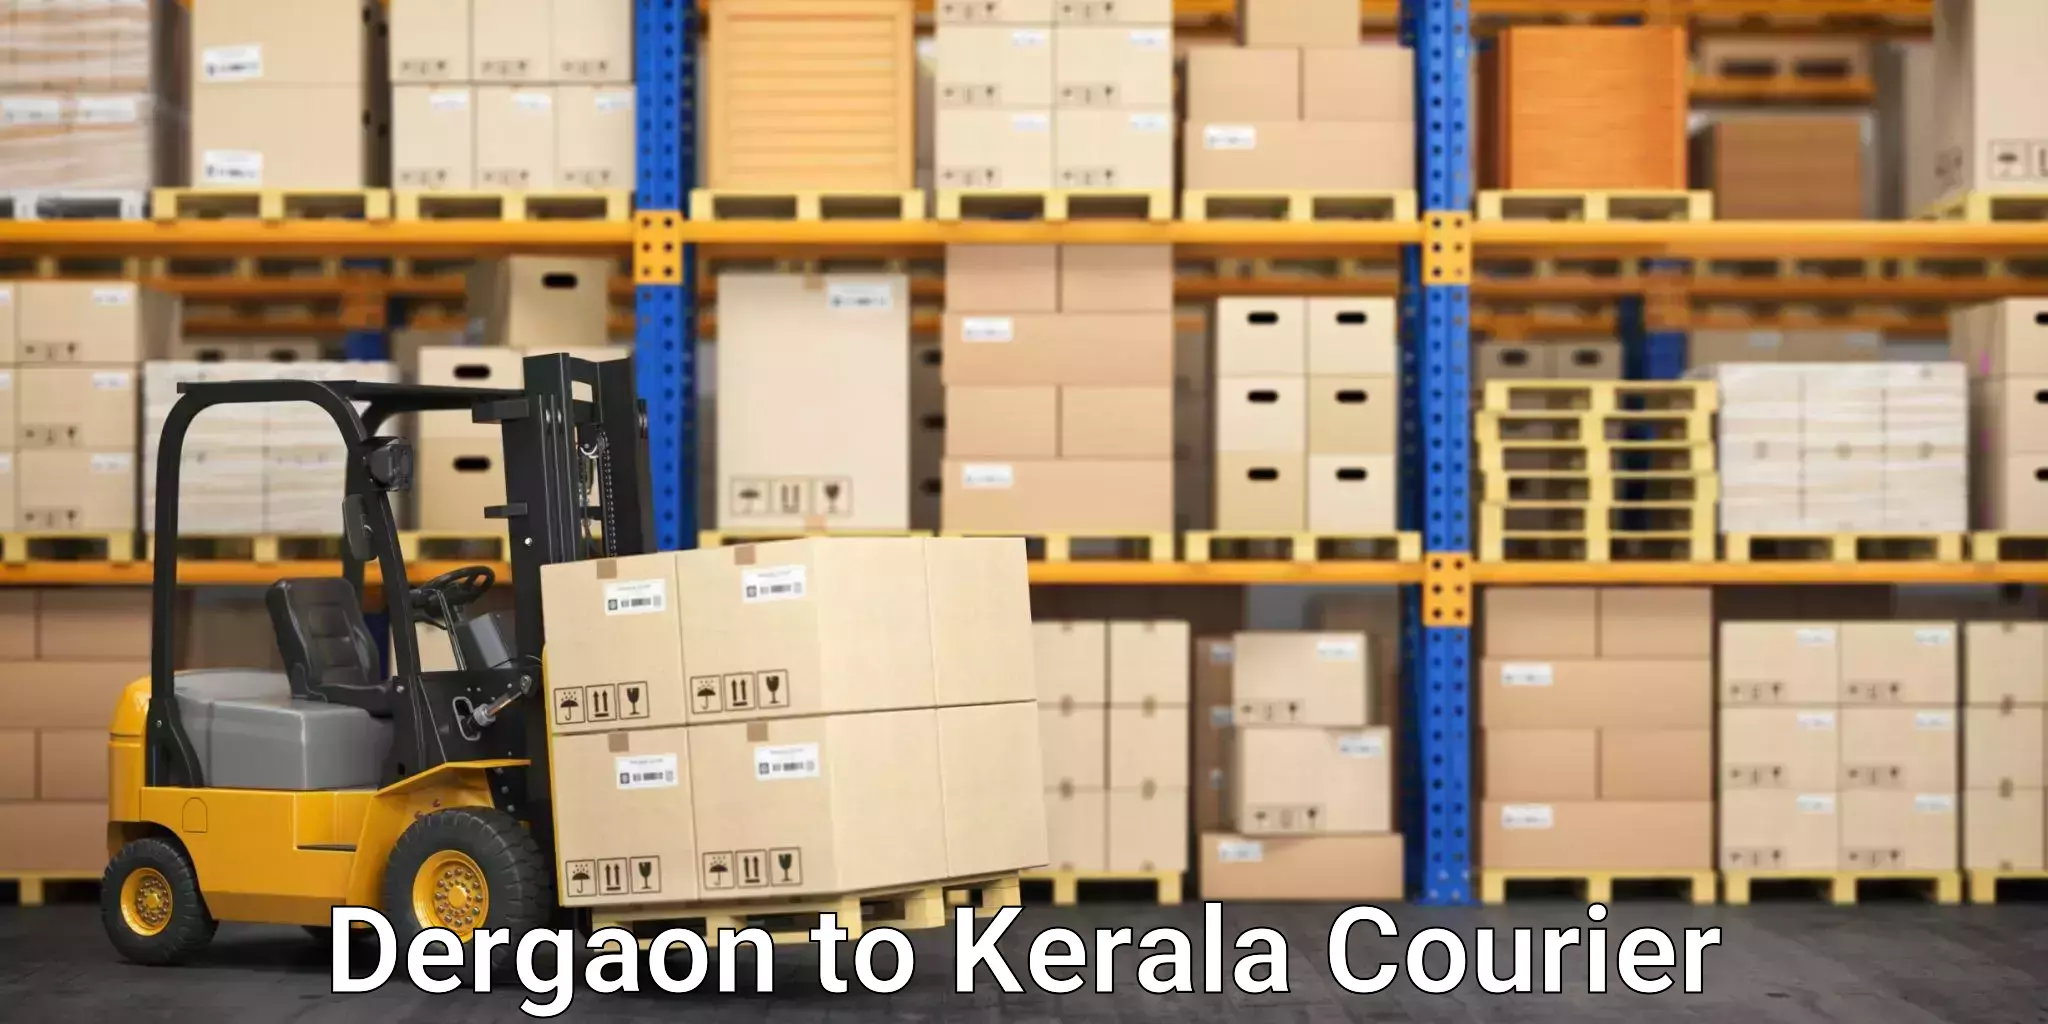 Efficient shipping operations Dergaon to Calicut